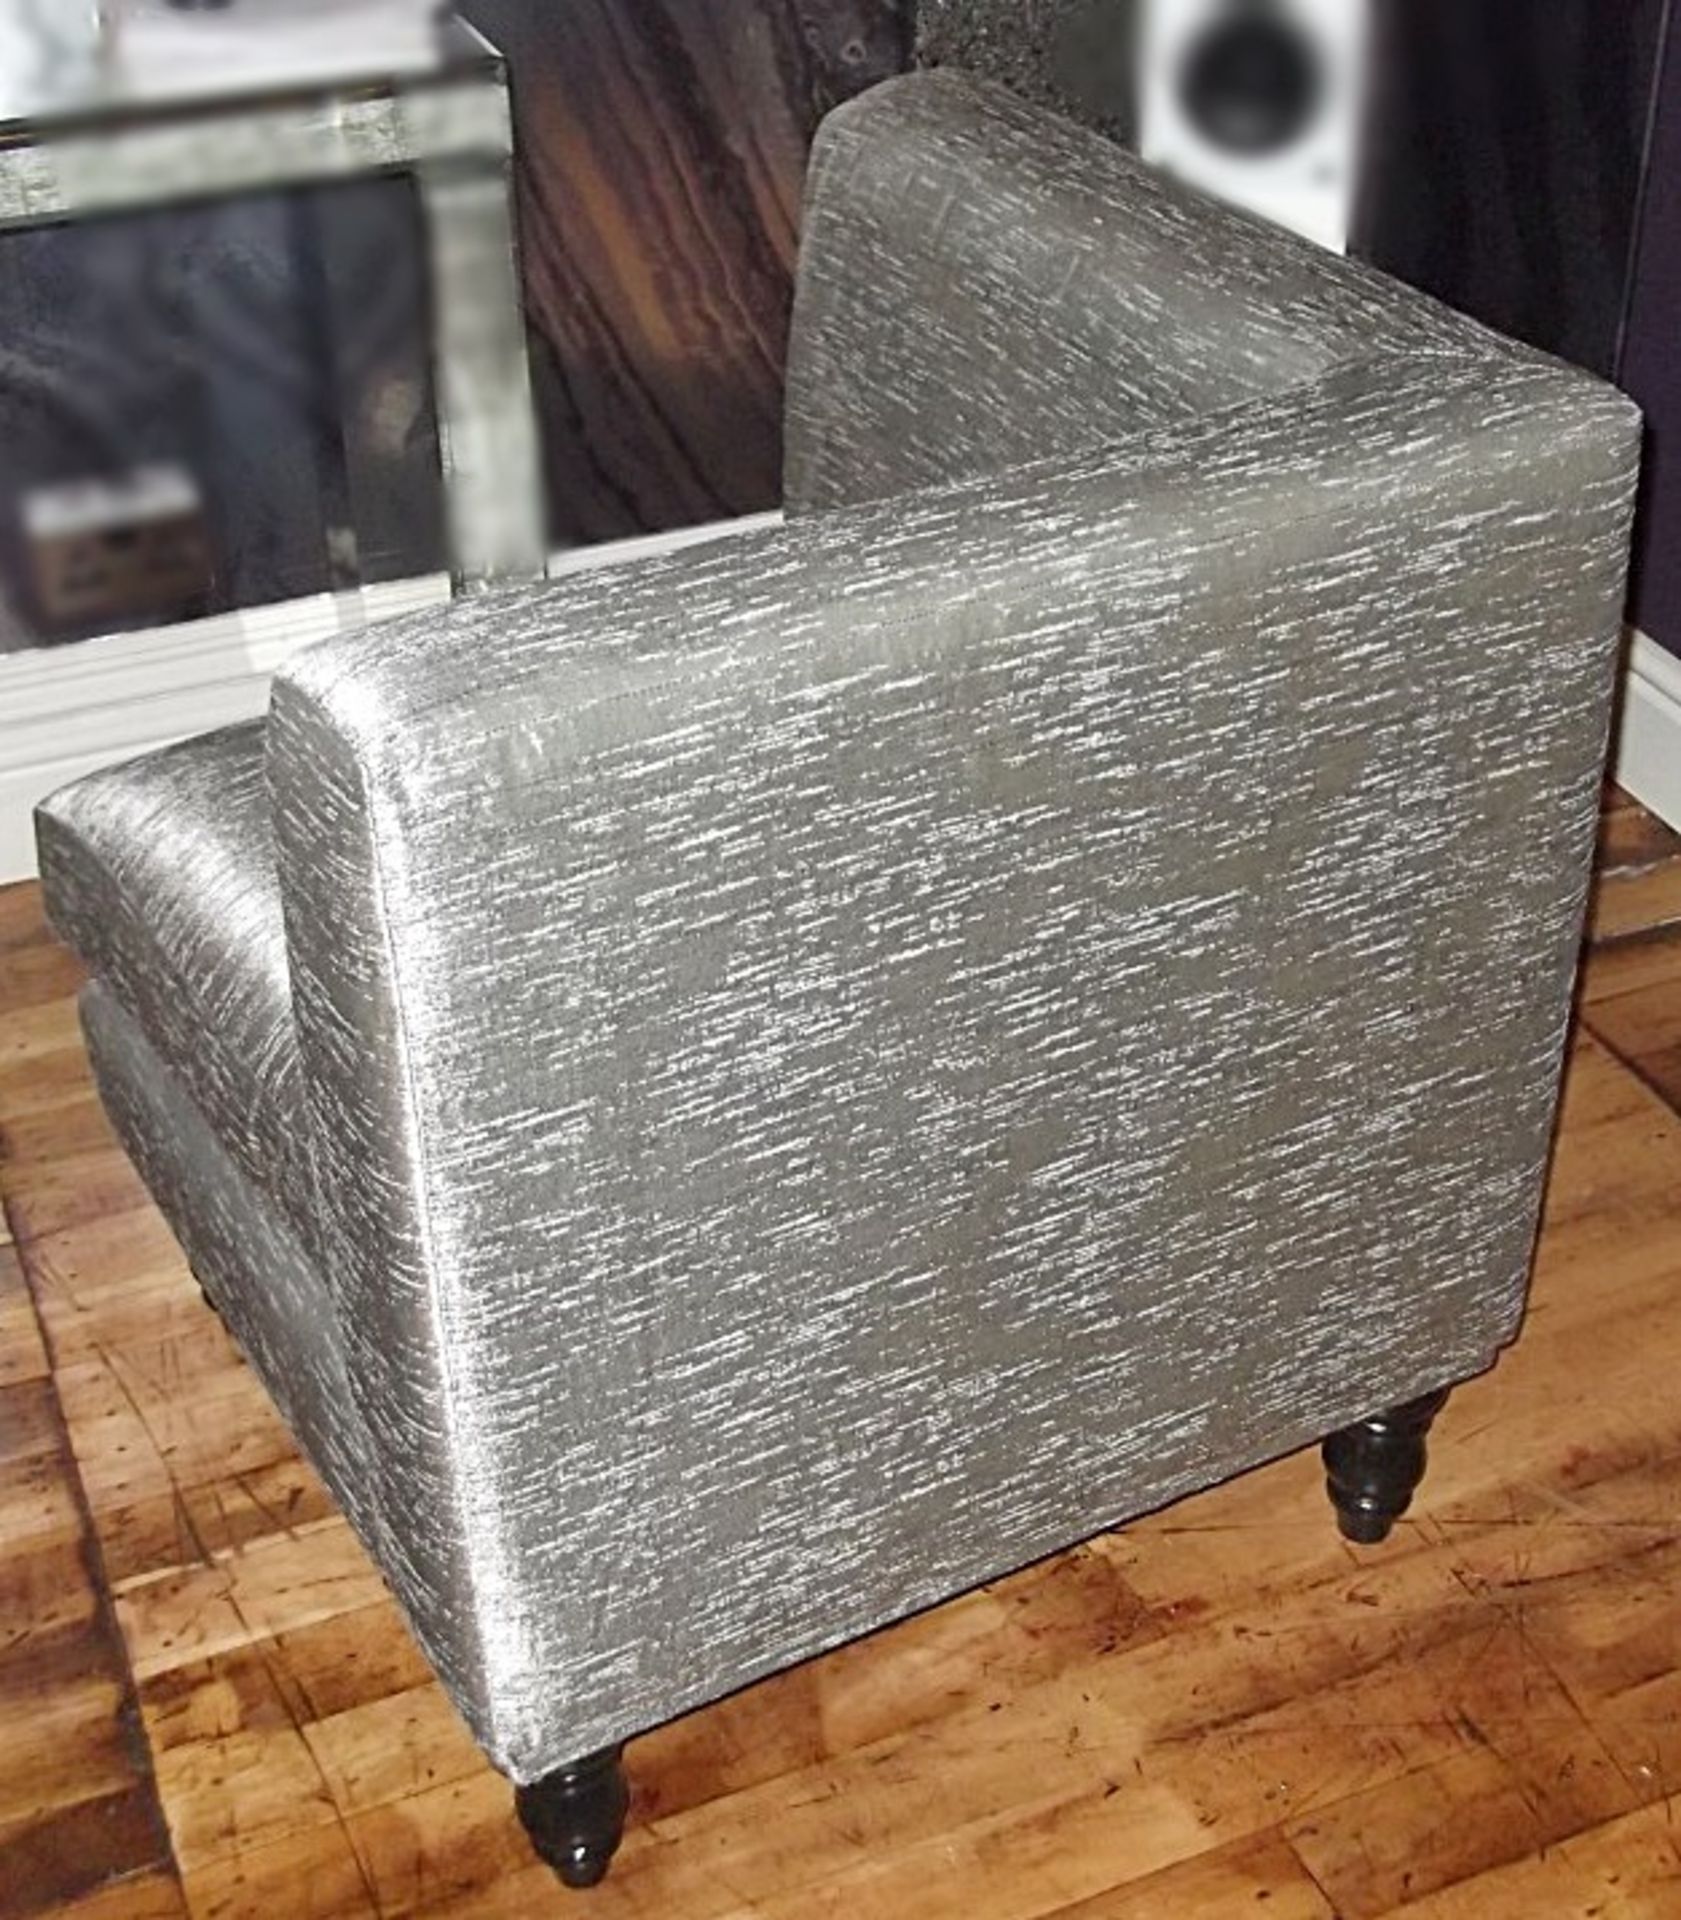 1 x Bespoke Handcrafted Corner Chair - Richly Upholstered In An Opulent Silver Chenille - - Image 4 of 4